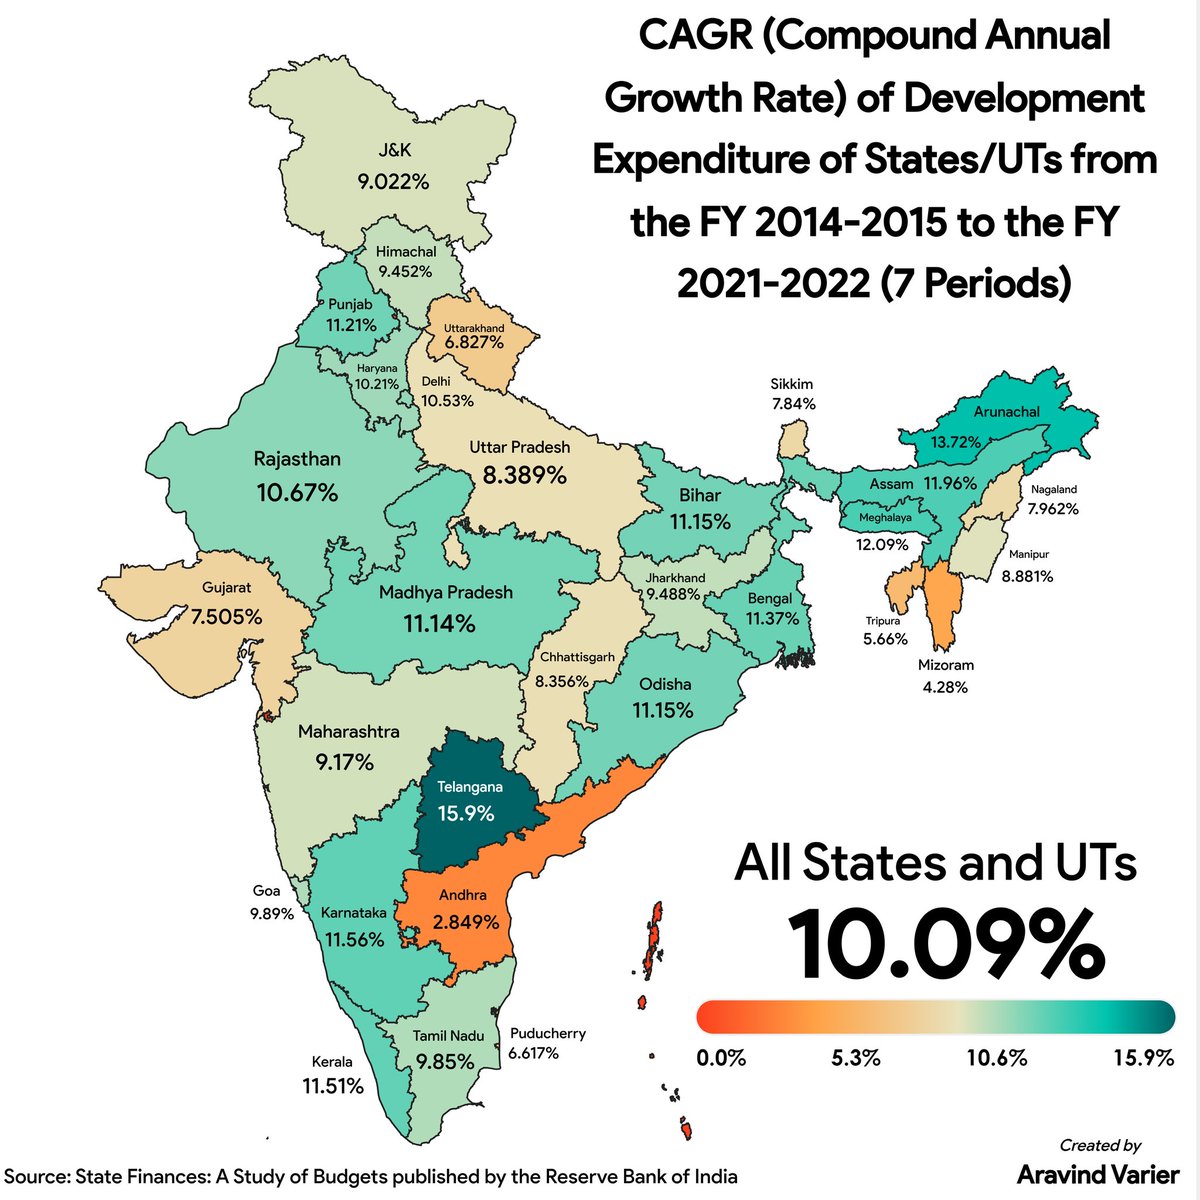 CAGR (Compound Annual Growth Rate) of Development Expenditure of States/UTs from the FY 2014-2015 to the FY 2021-2022 (7 Periods)